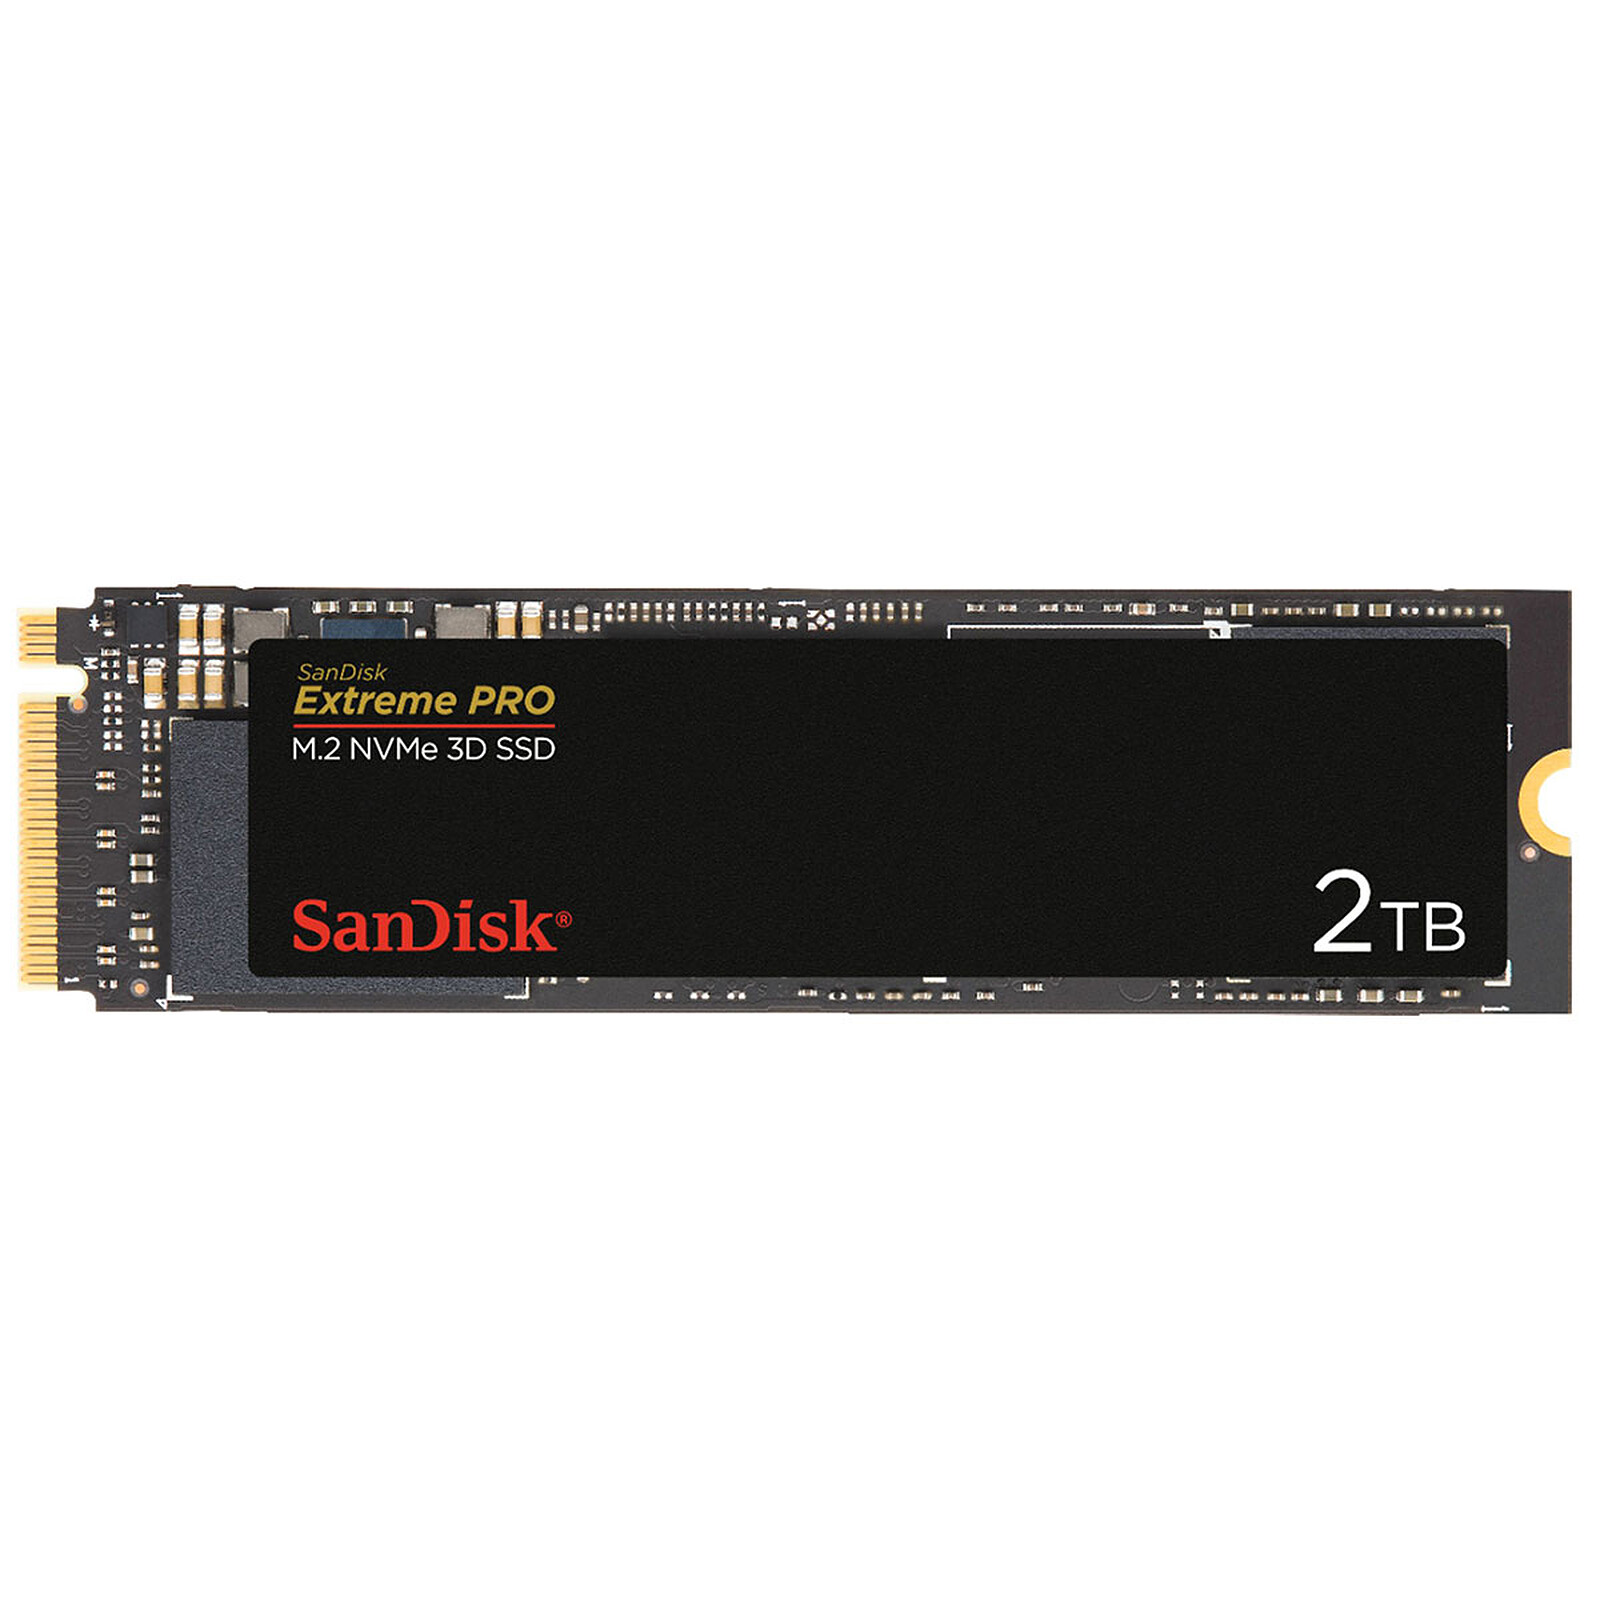 Sandisk Extreme Pro M.2 PCIe NVMe 2TB - SSD - LDLC 3-year warranty